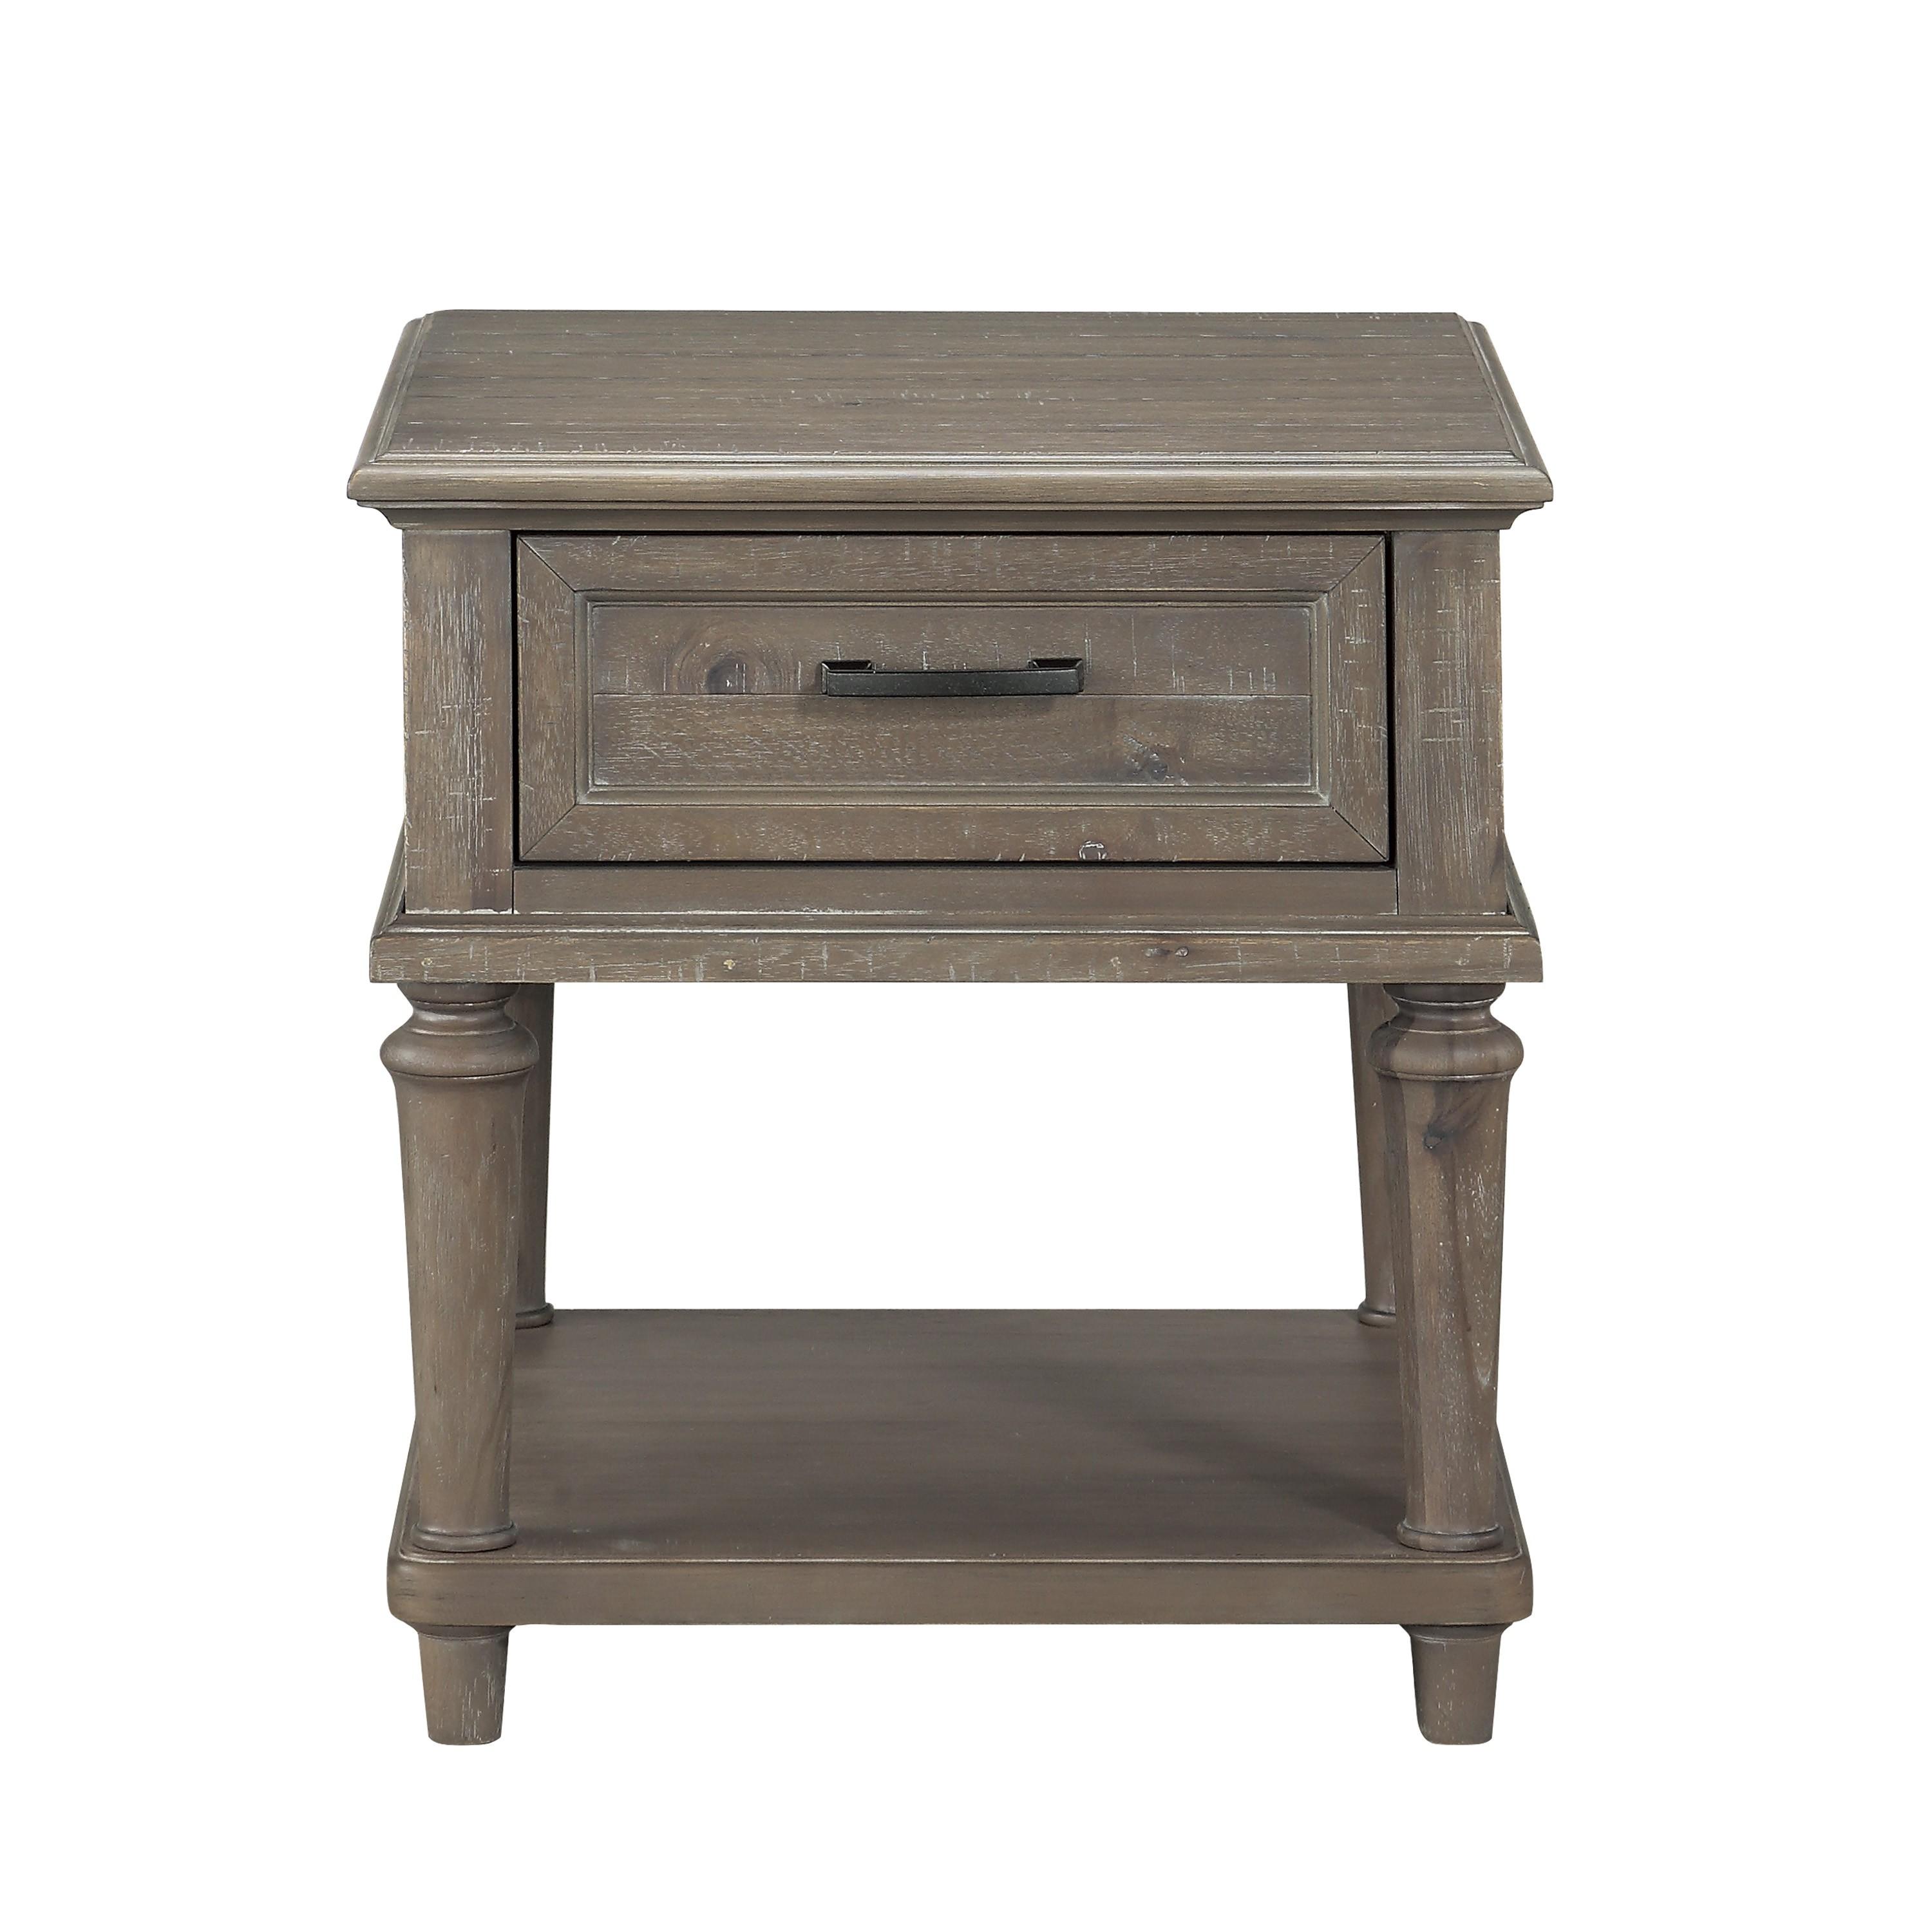 Transitional End Table 1689BR-04 Cardano 1689BR-04 in Light Brown 